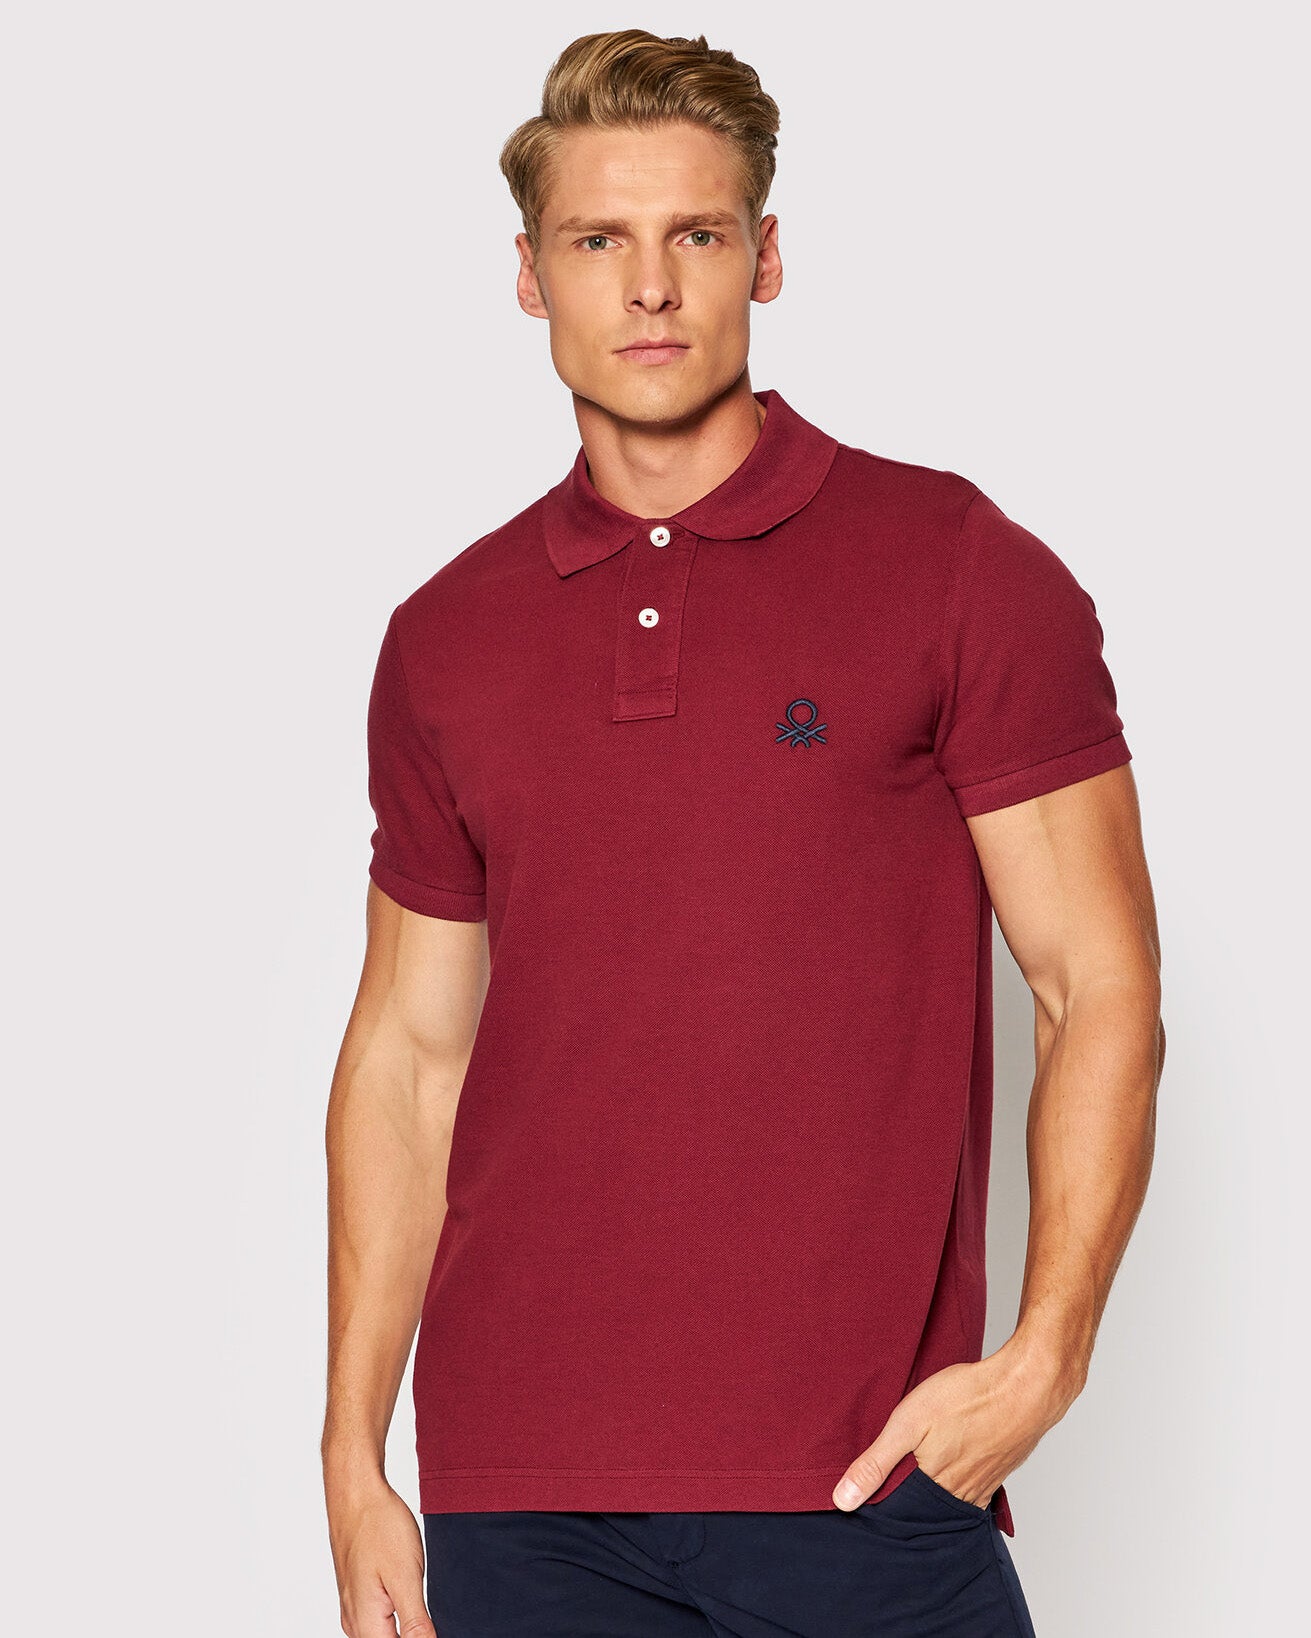 Red Polo Shirt H/S